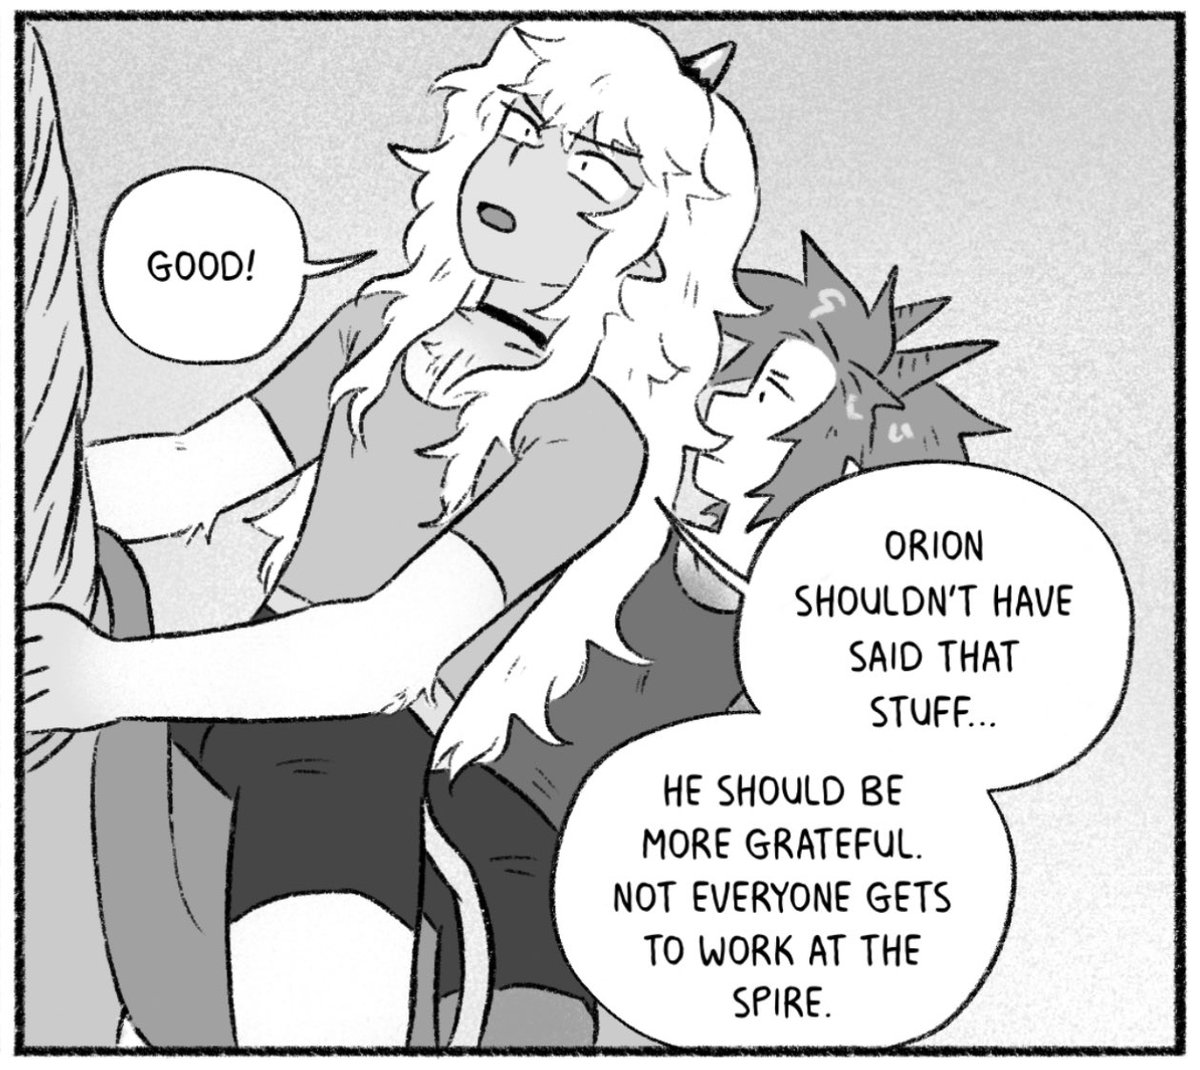 I was a sleepy lil bitch yesterday and didn't make my update tweet lmao BUT page 346 of Sparks DID go up as per usual 😌✨

✨https://t.co/NjeOKk8PsJ
✨Tapas https://t.co/1D9Is7ElDv
✨Support & read 100+ pages ahead https://t.co/Pkf9mTOqIX 